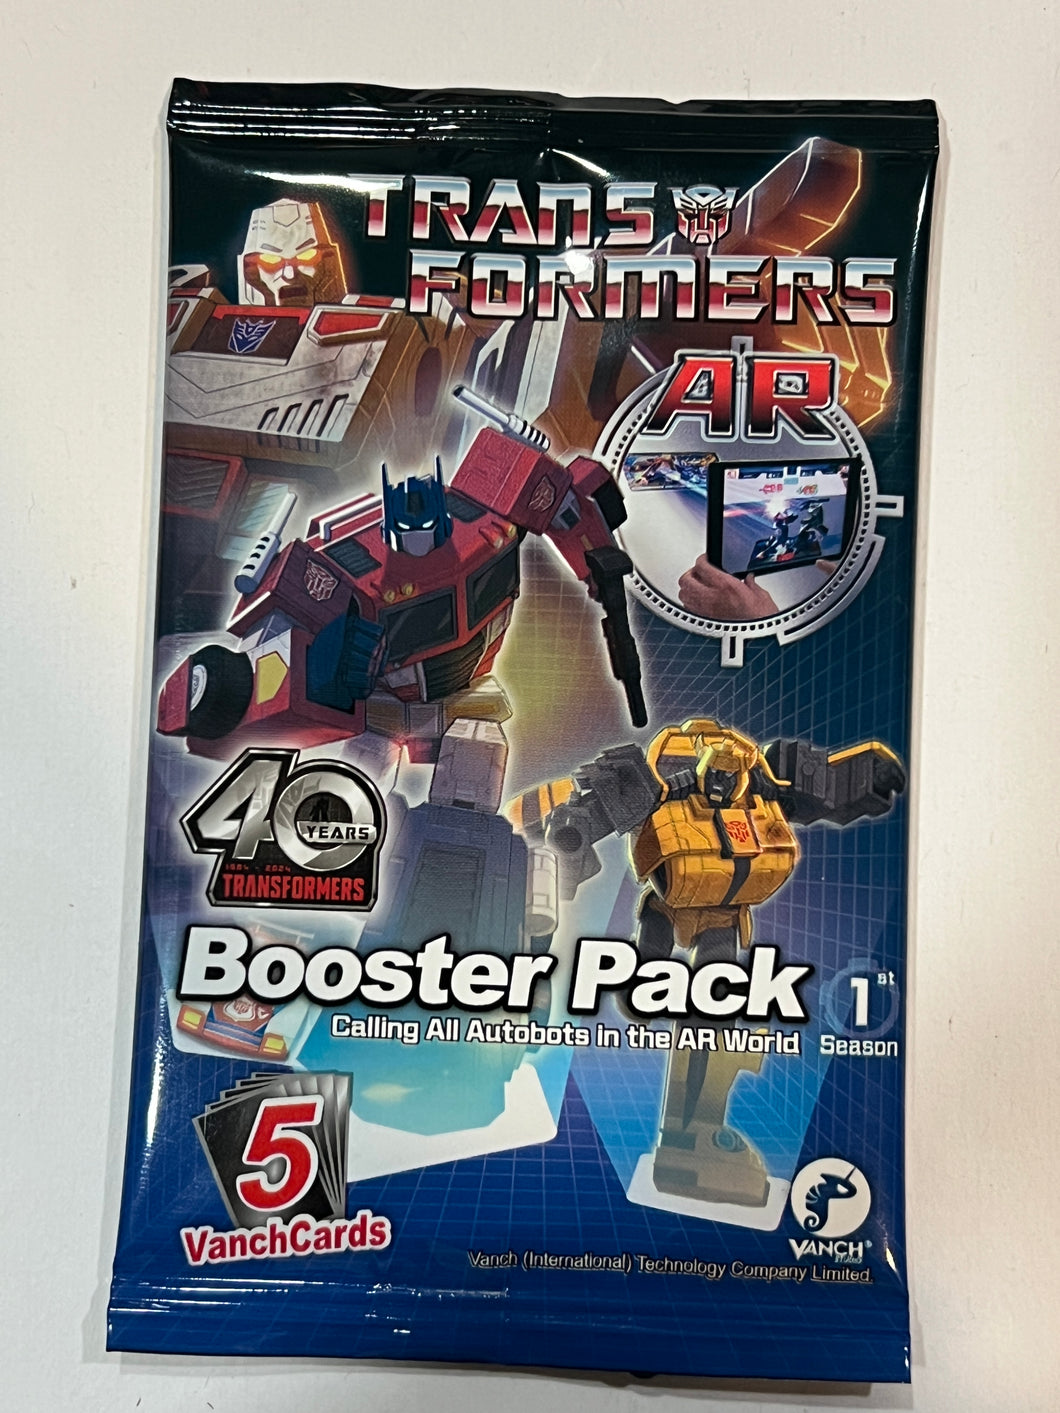 Transformers Vanch Card Booster Pack Season 1